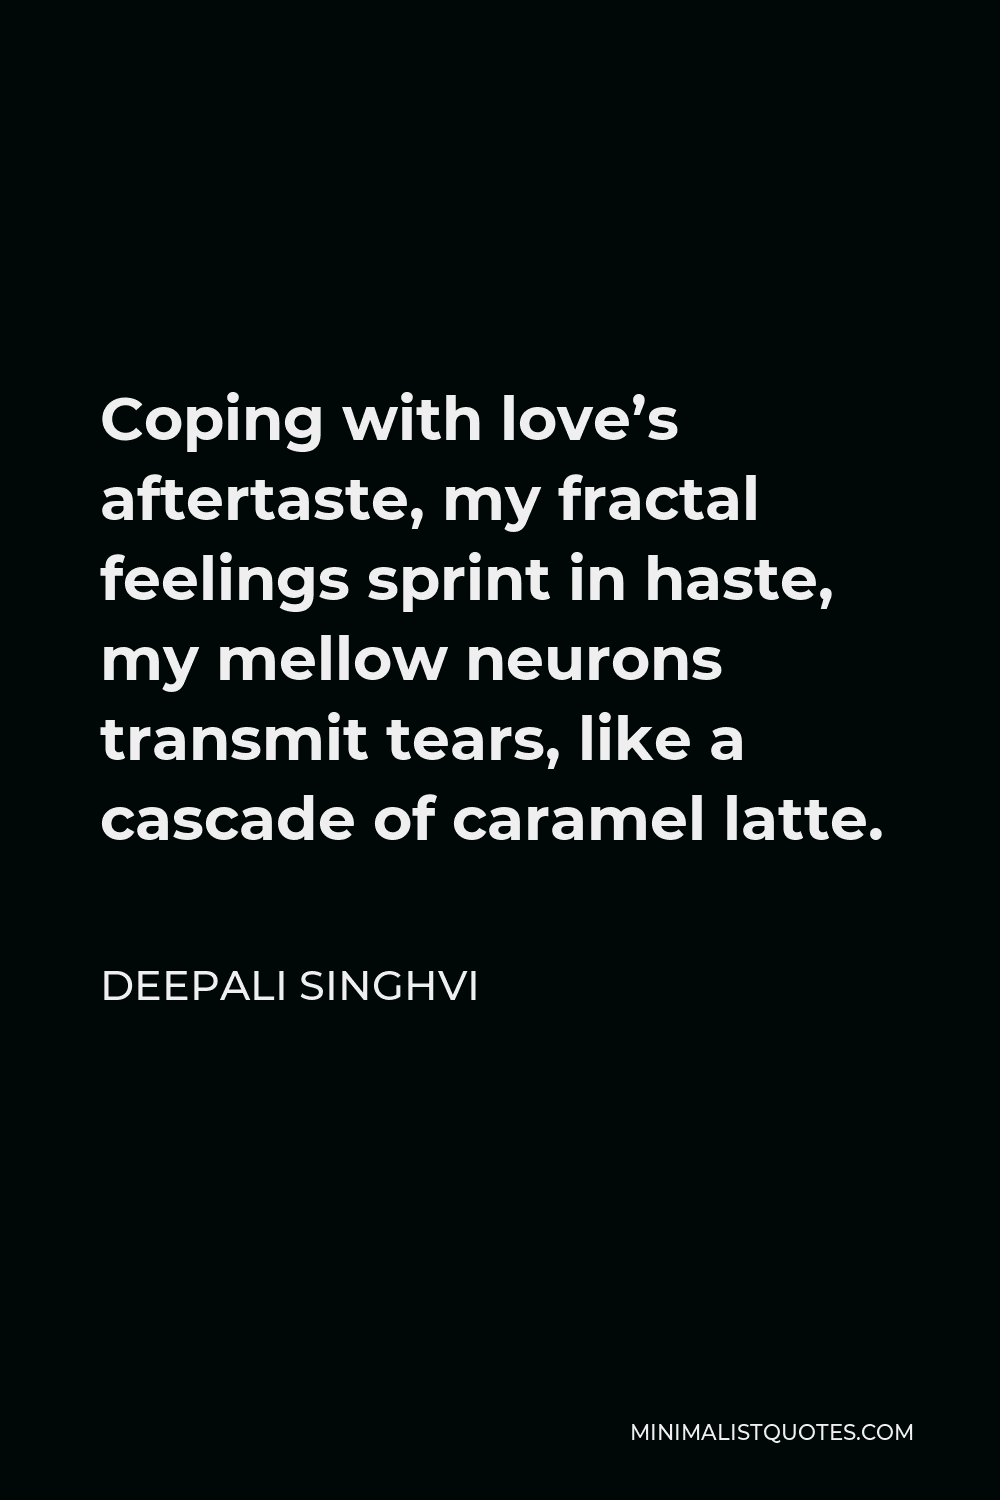 Deepali Singhvi Quote - Coping with love’s aftertaste, my fractal feelings sprint in haste, my mellow neurons transmit tears, like a cascade of caramel latte.